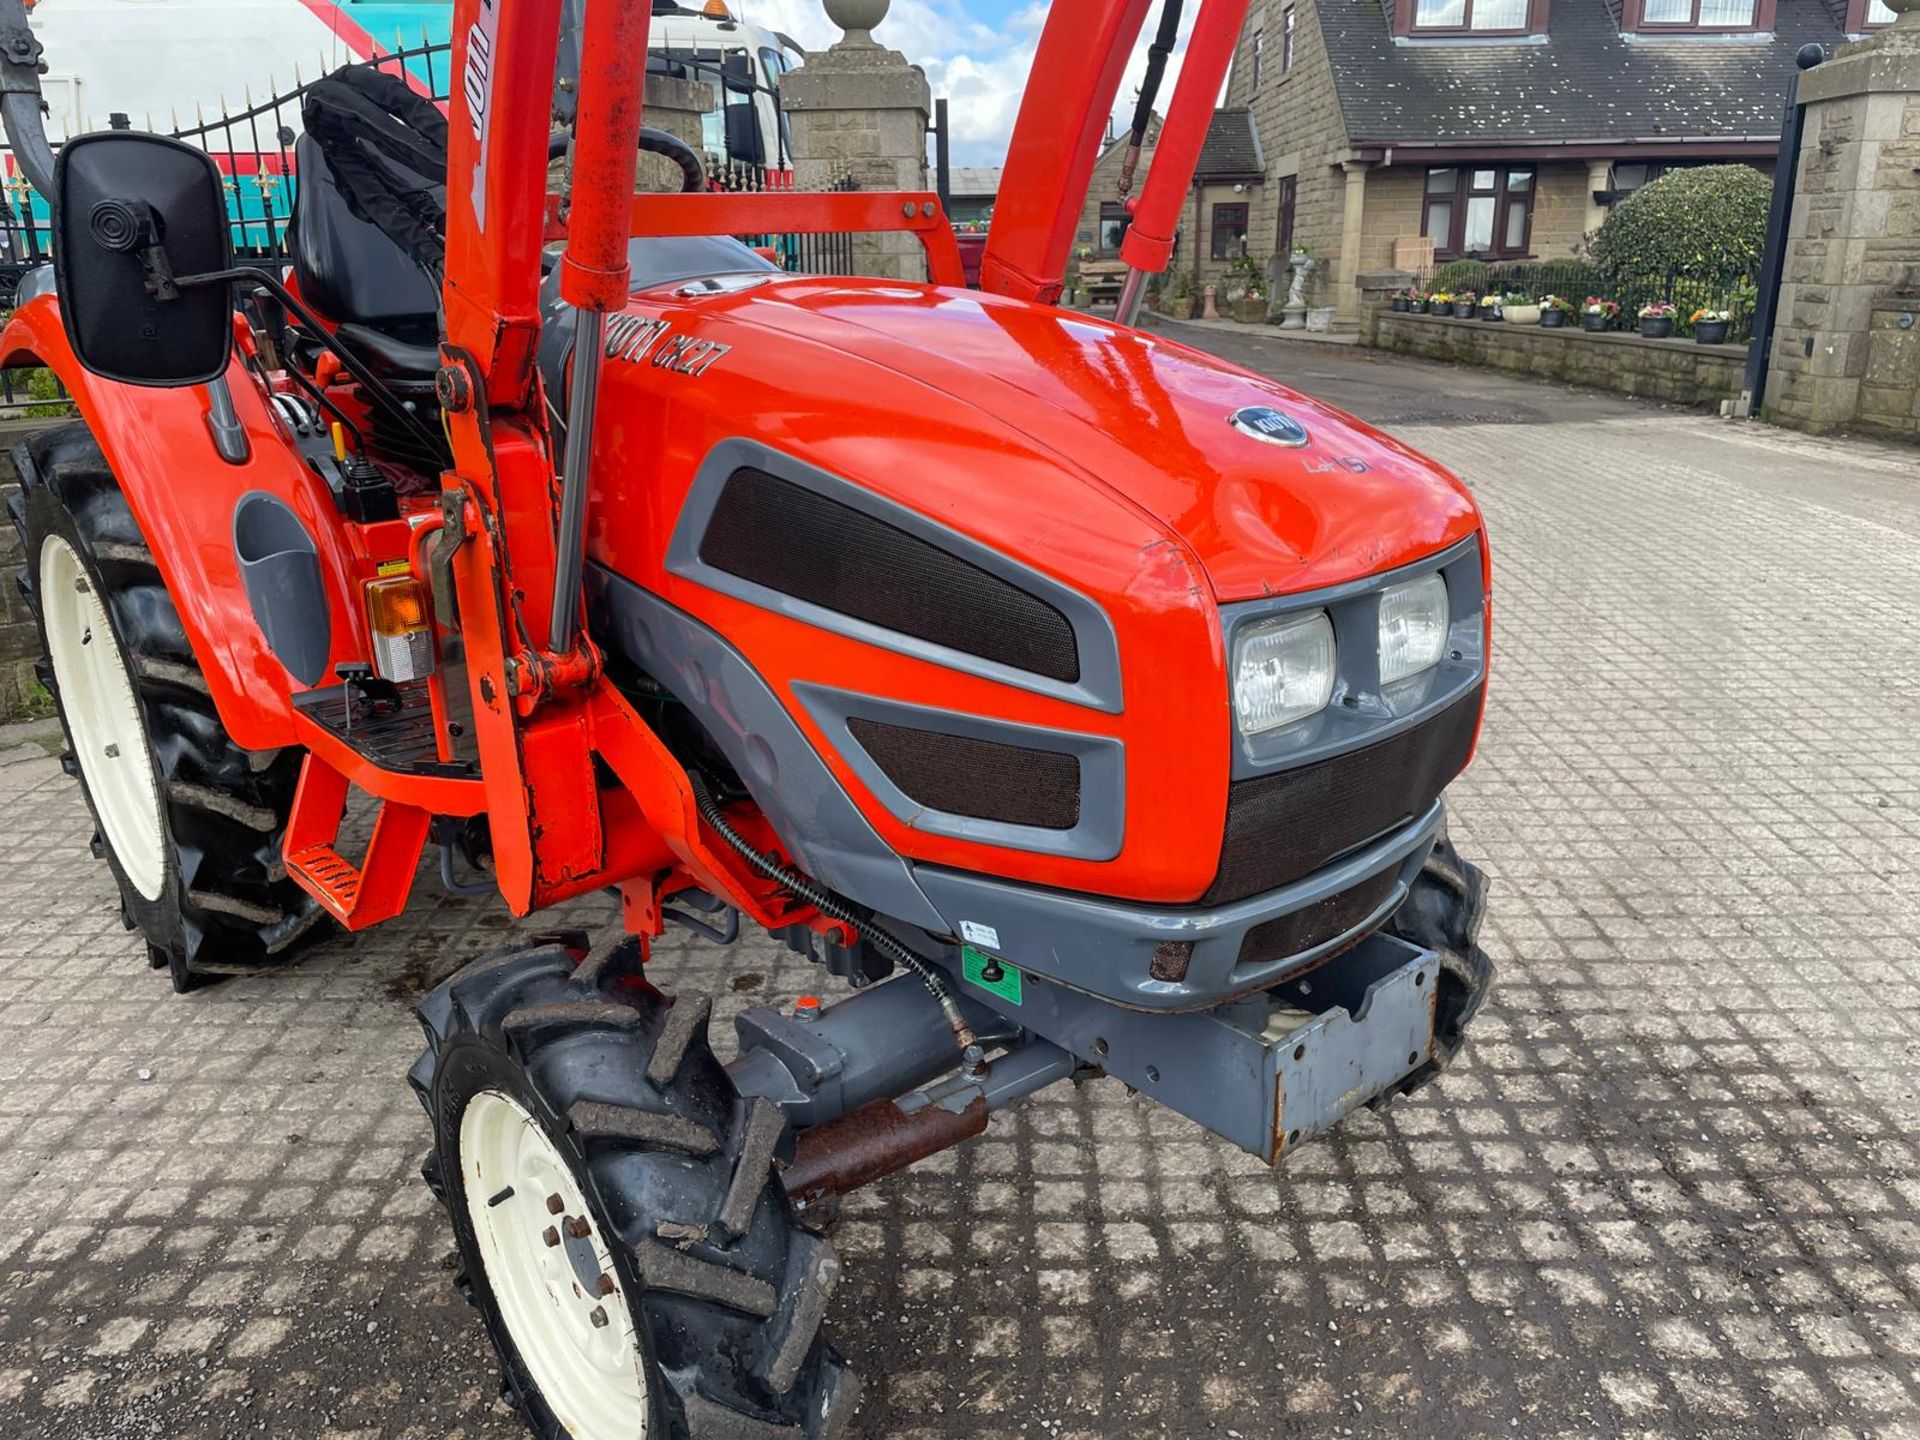 60 REG KIOTI CX27 27HP 4WD COMPACT TRACTOR WITH KIOTI KL130 FRONT LOADER AND PALLET FORKS *PLUS VAT* - Image 5 of 19